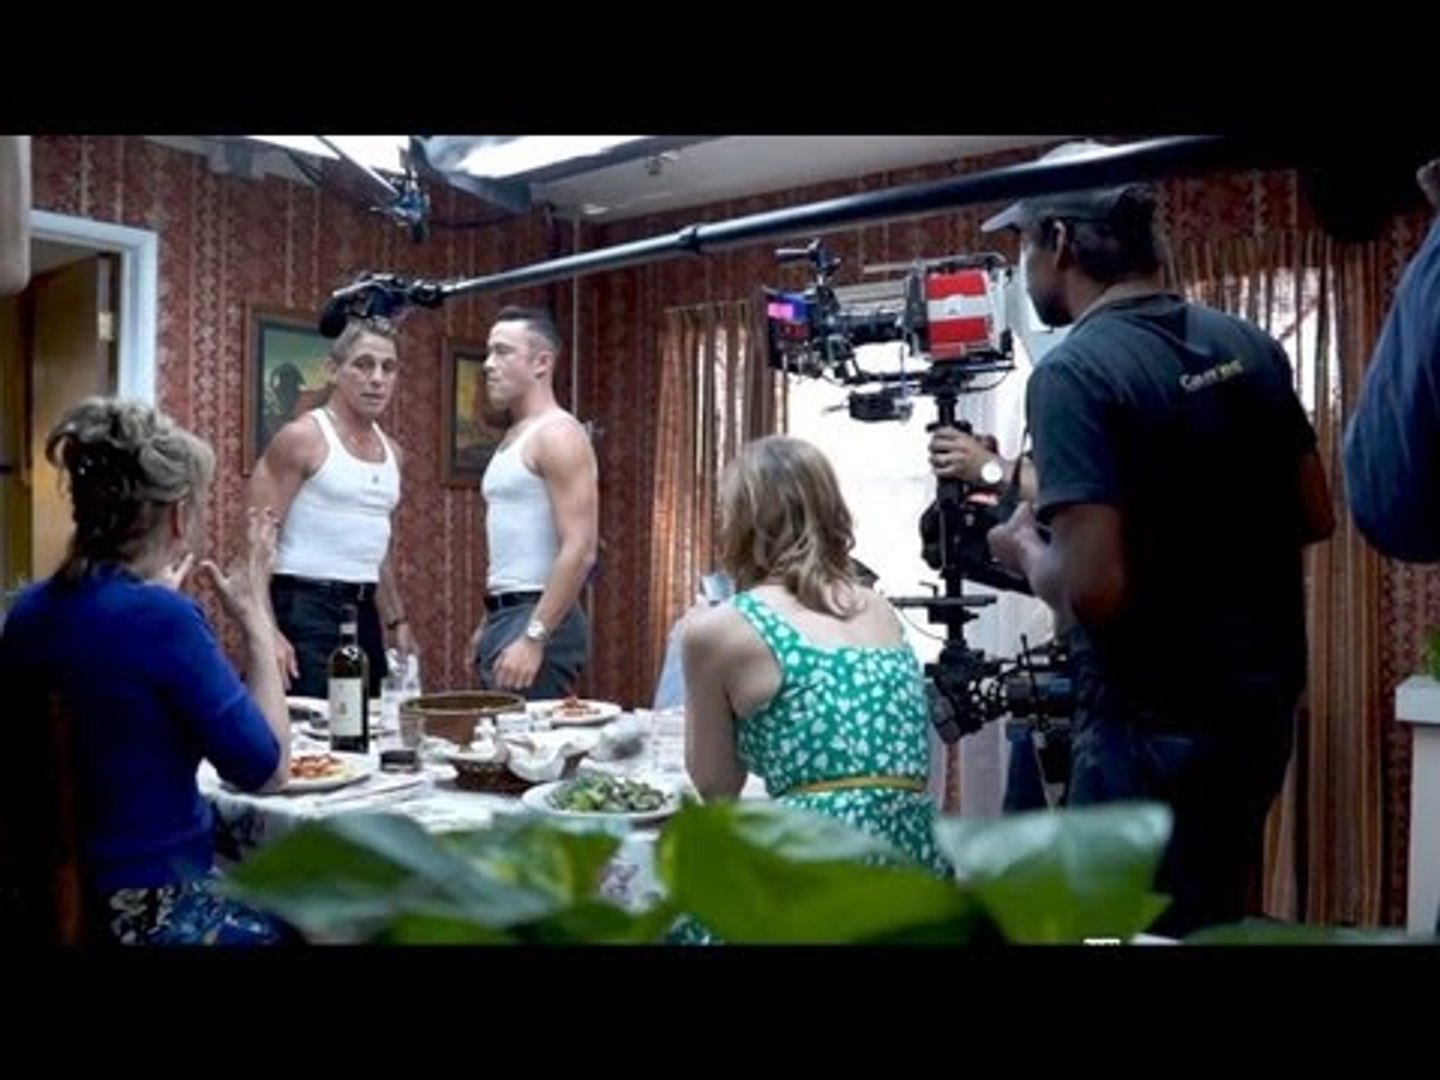 From don jon scenes Review: ‘Don